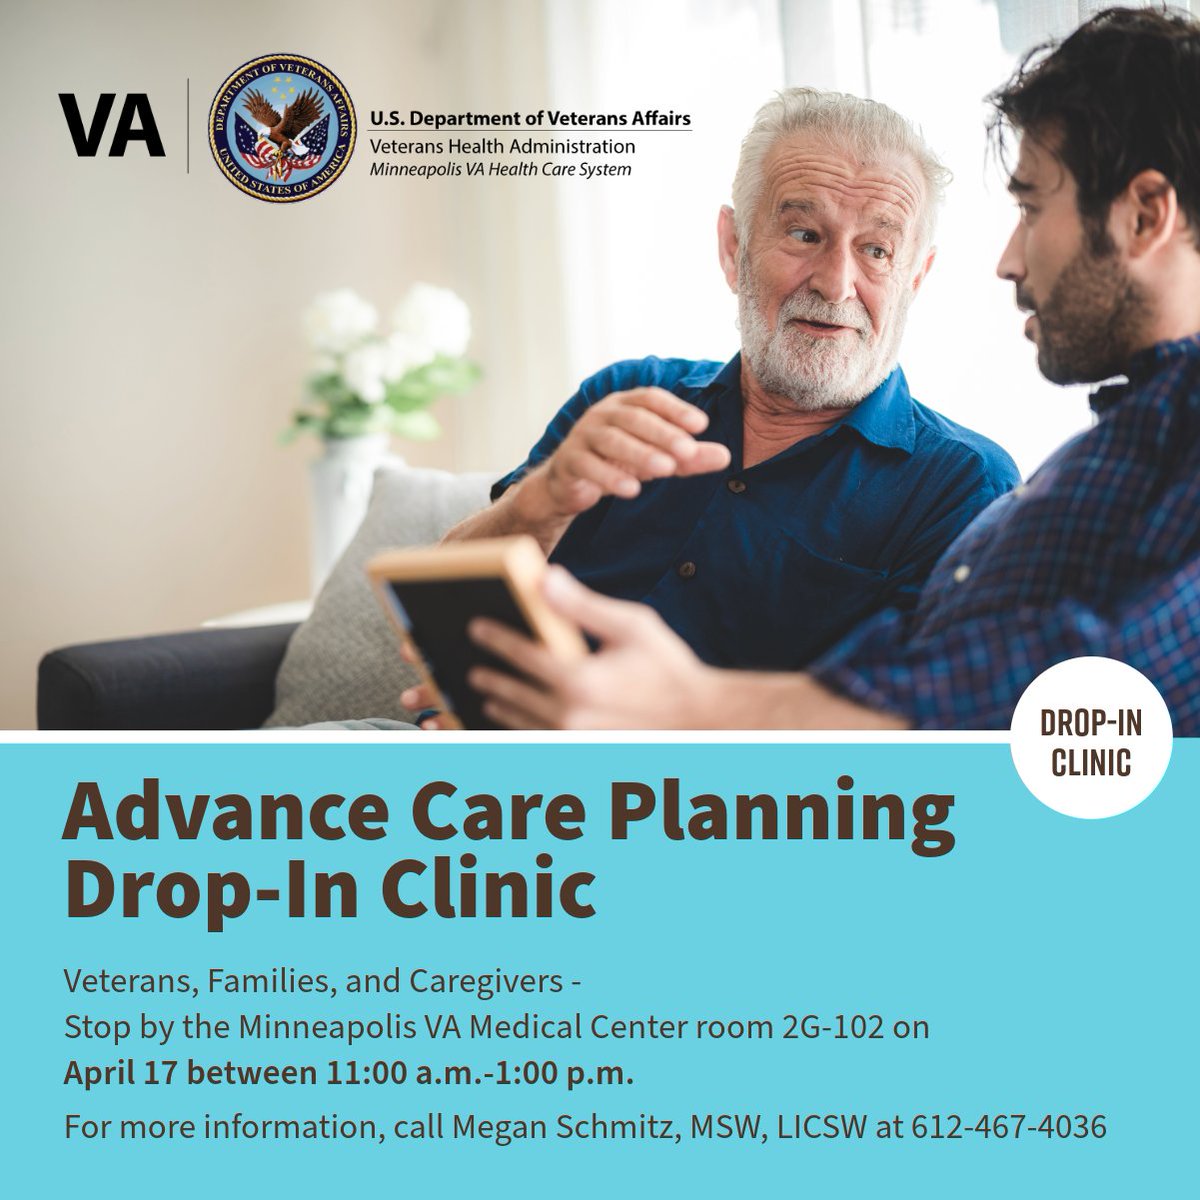 Veterans, Families, and Caregivers - Stop by the Minneapolis VA medical center for a drop-in Advanced Care Planning clinic in room 2G-102 on April 17 from 11:00 a.m.-1:00 p.m. Questions? Contact Megan Schmitz, Advance Care Planning Coordinator, for more information 612-467-4036.